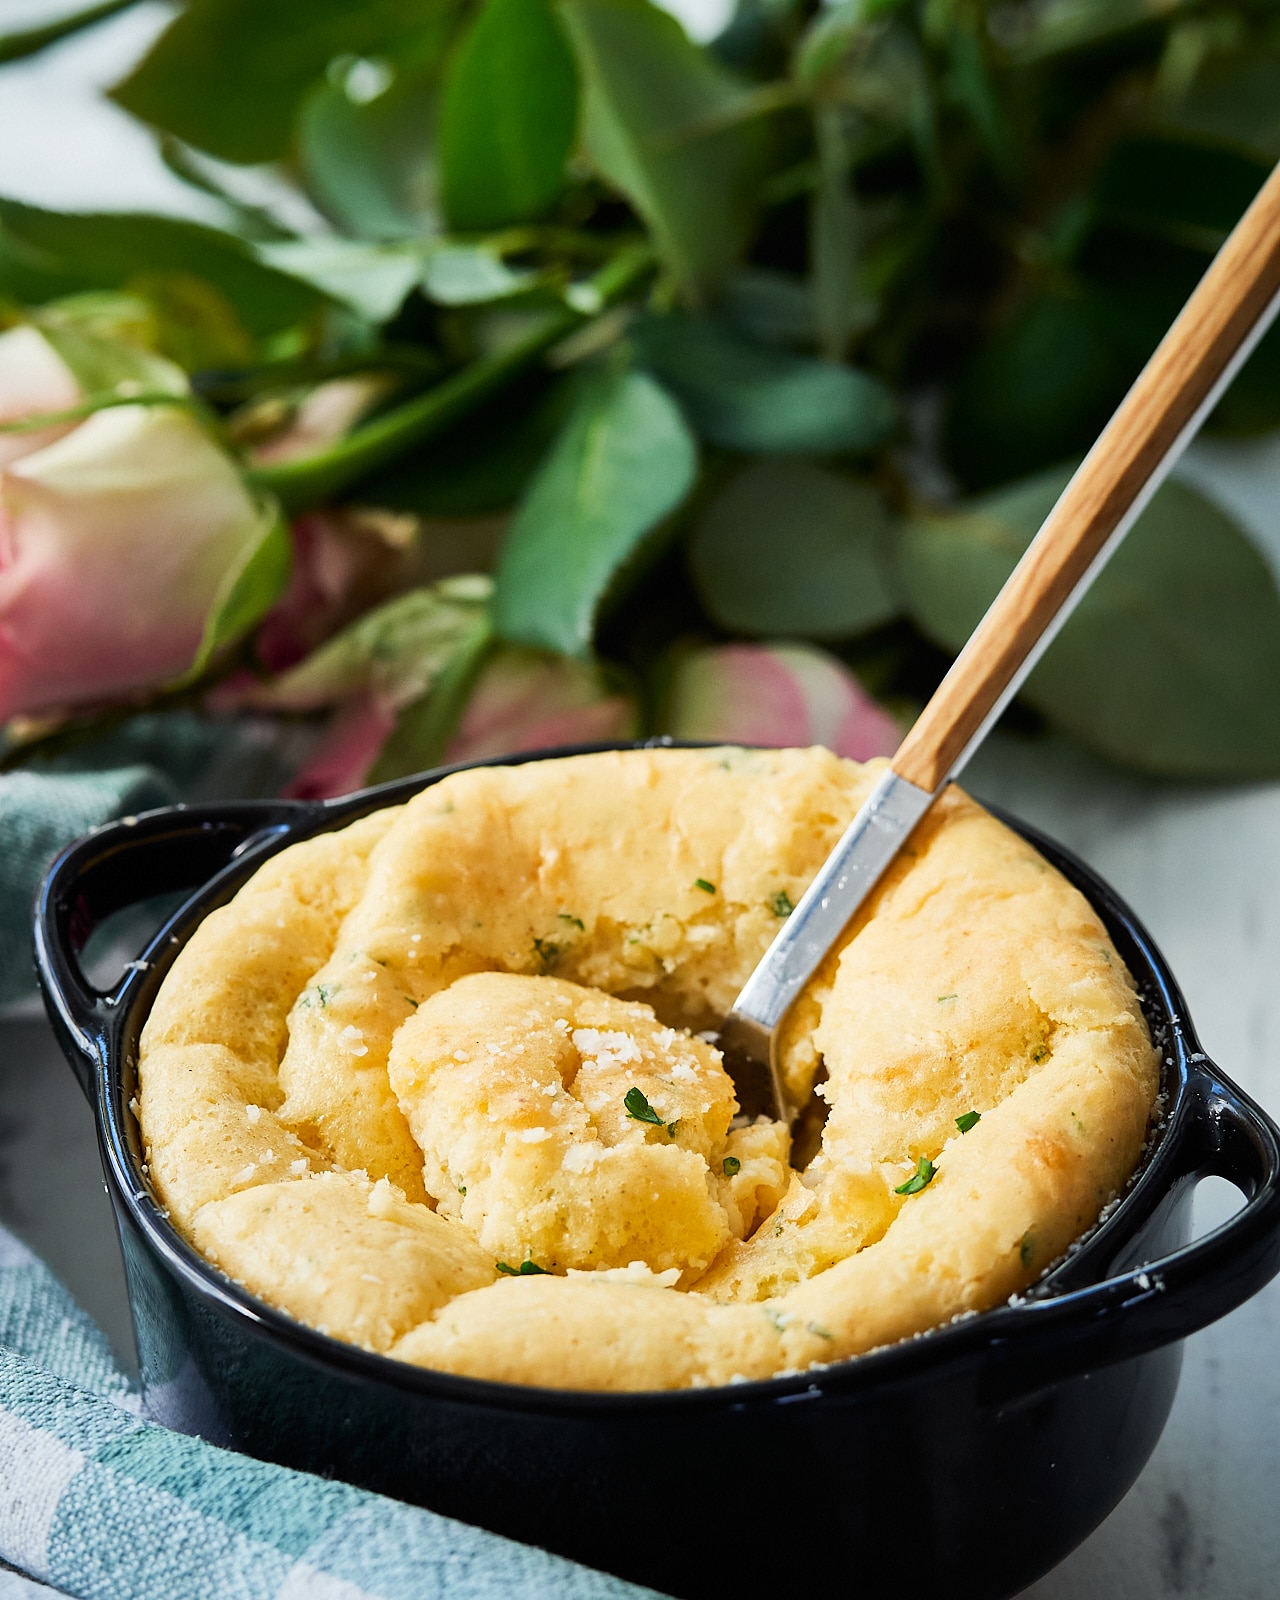 Baked cheese souffle with spices